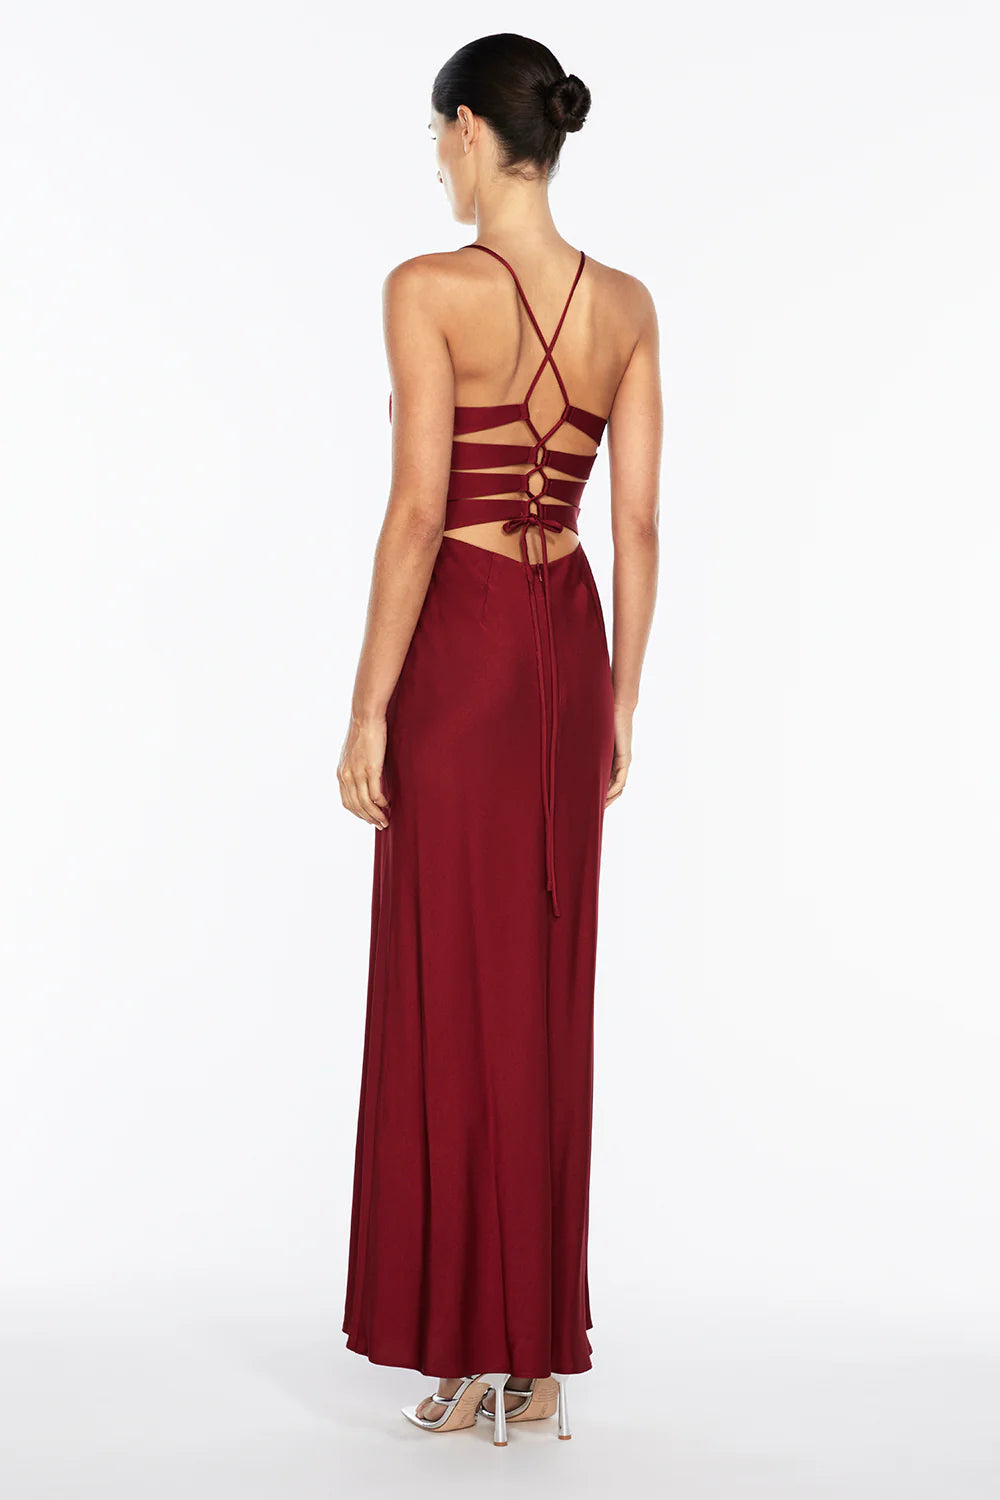 Manning Cartell Time to Shine Slip dress - Cranberry